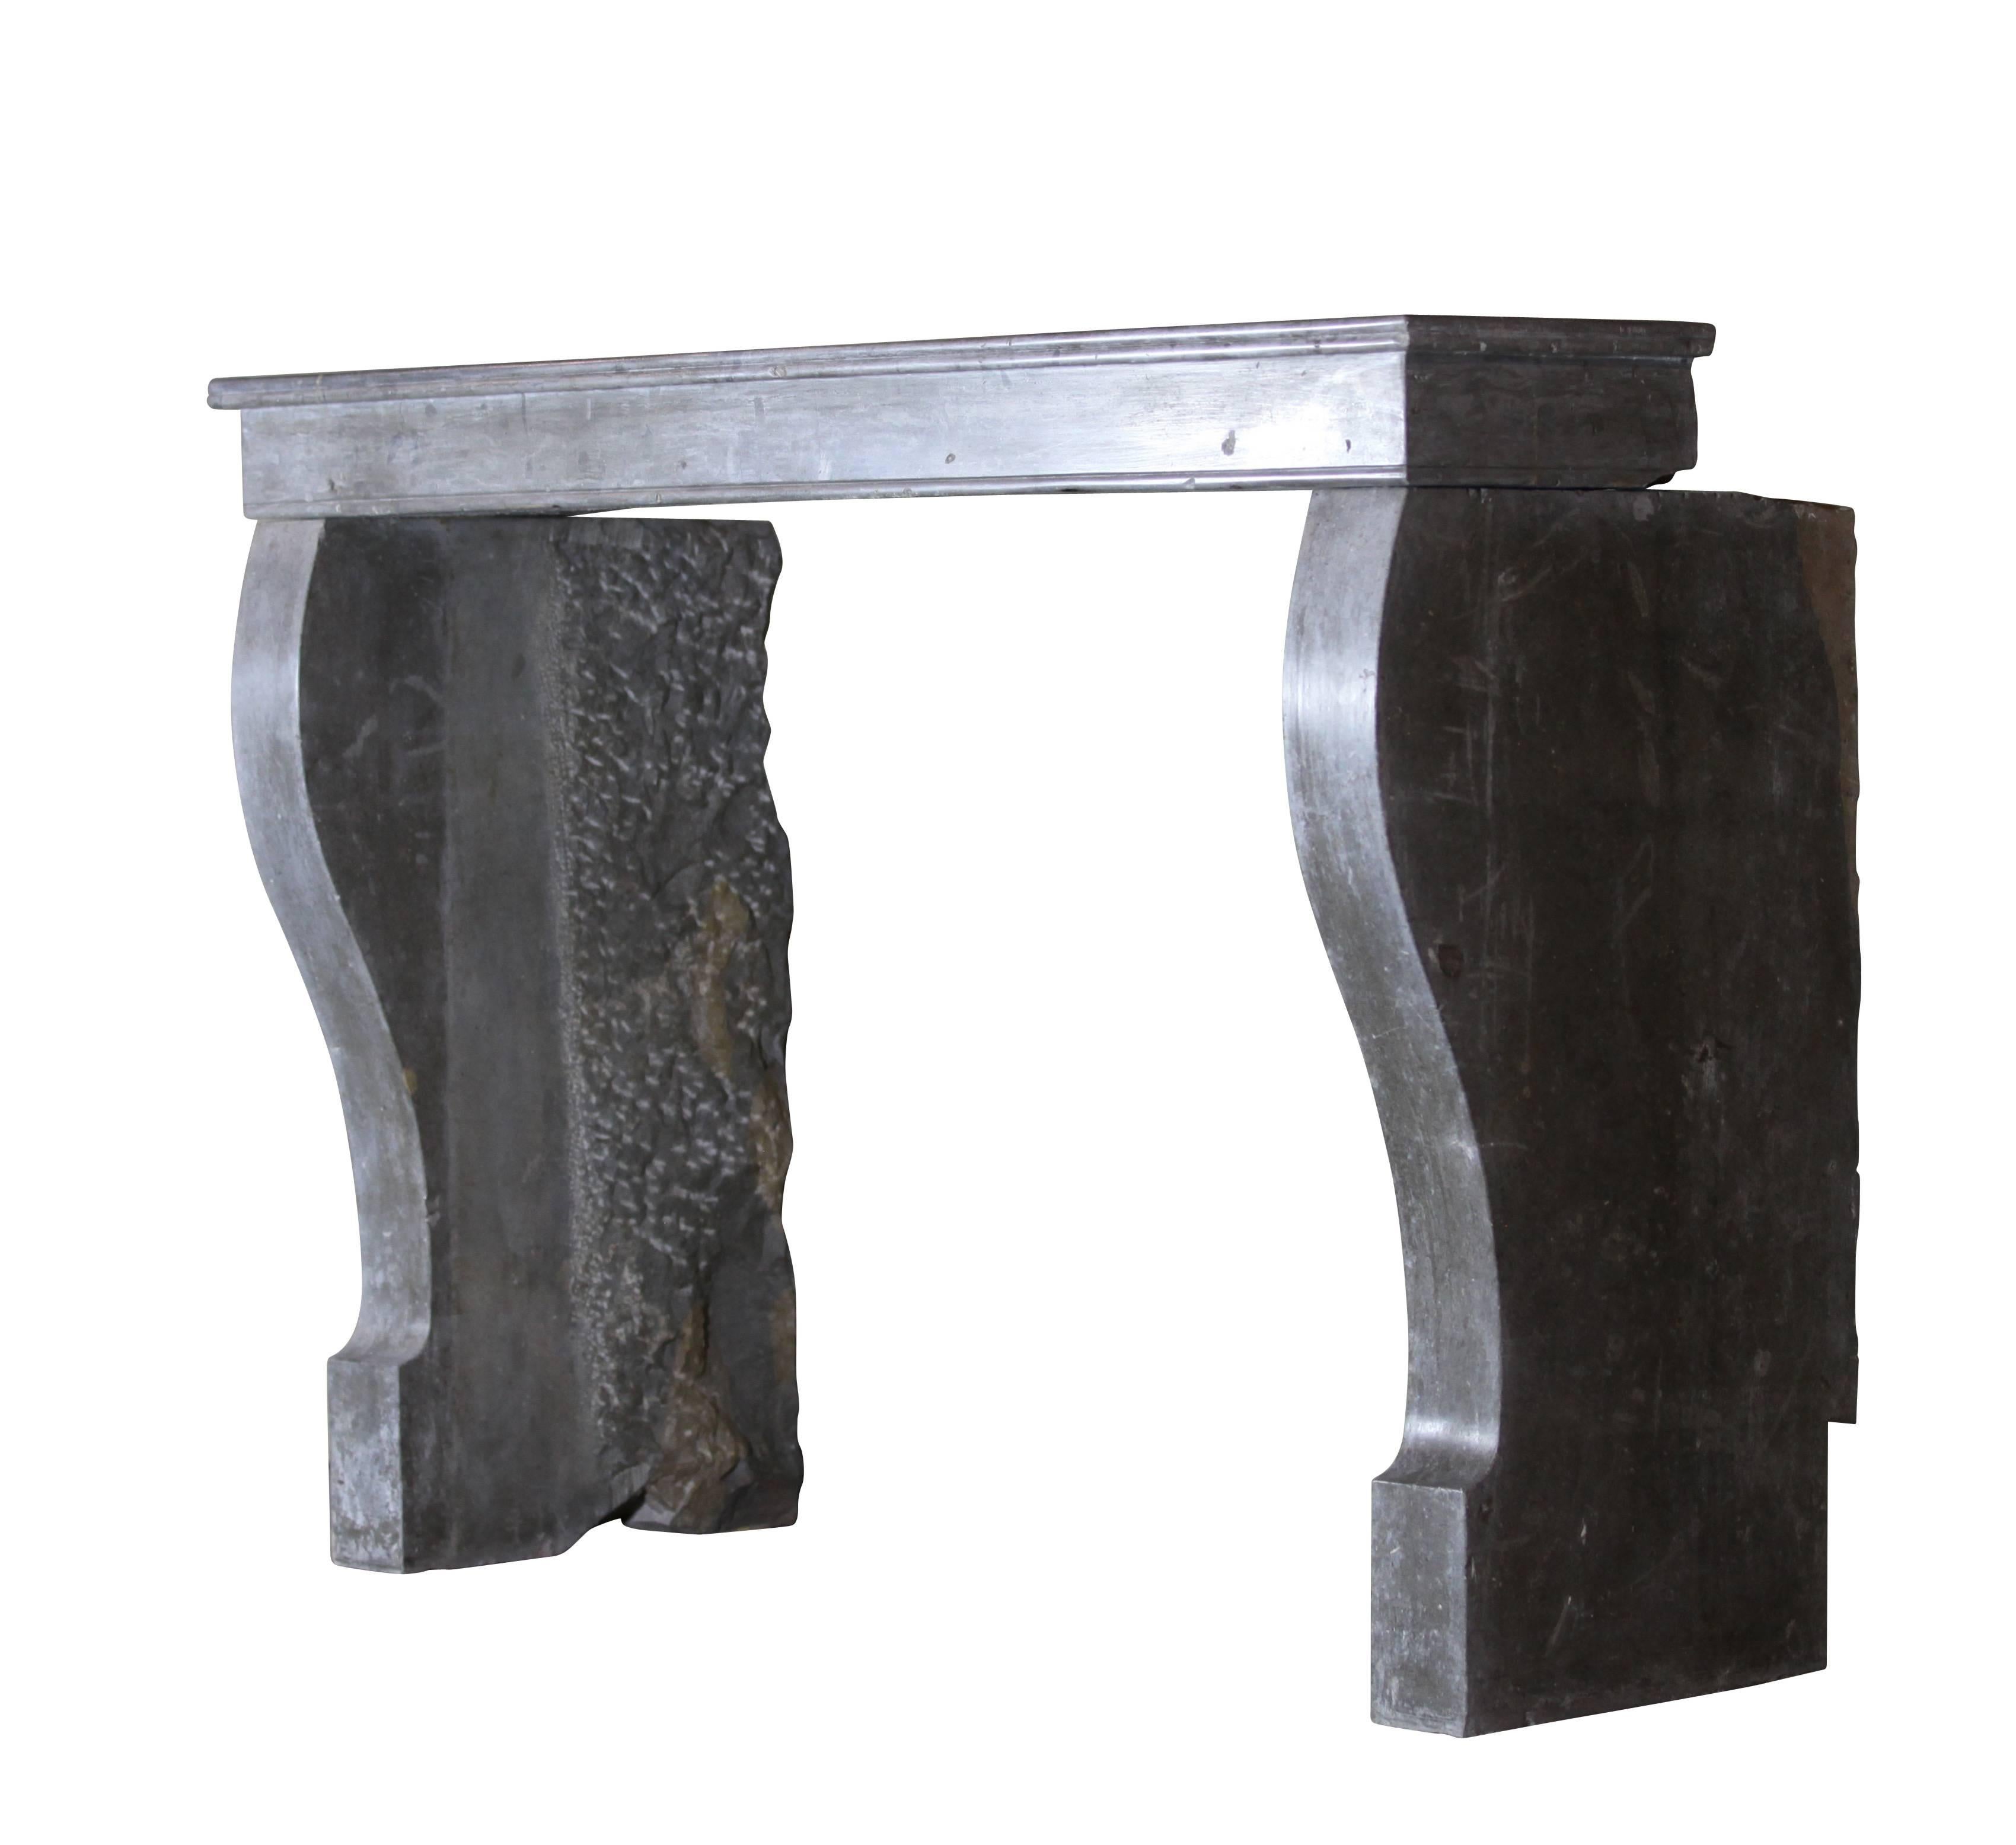 This Louis Philipe antique fireplace mantle is out of bicolor burgundy hard stone. It bears a nice patina and a straight fronton. A nice decorative element for a timely interior and small firebox
Measures:
133 cm EW 52,36